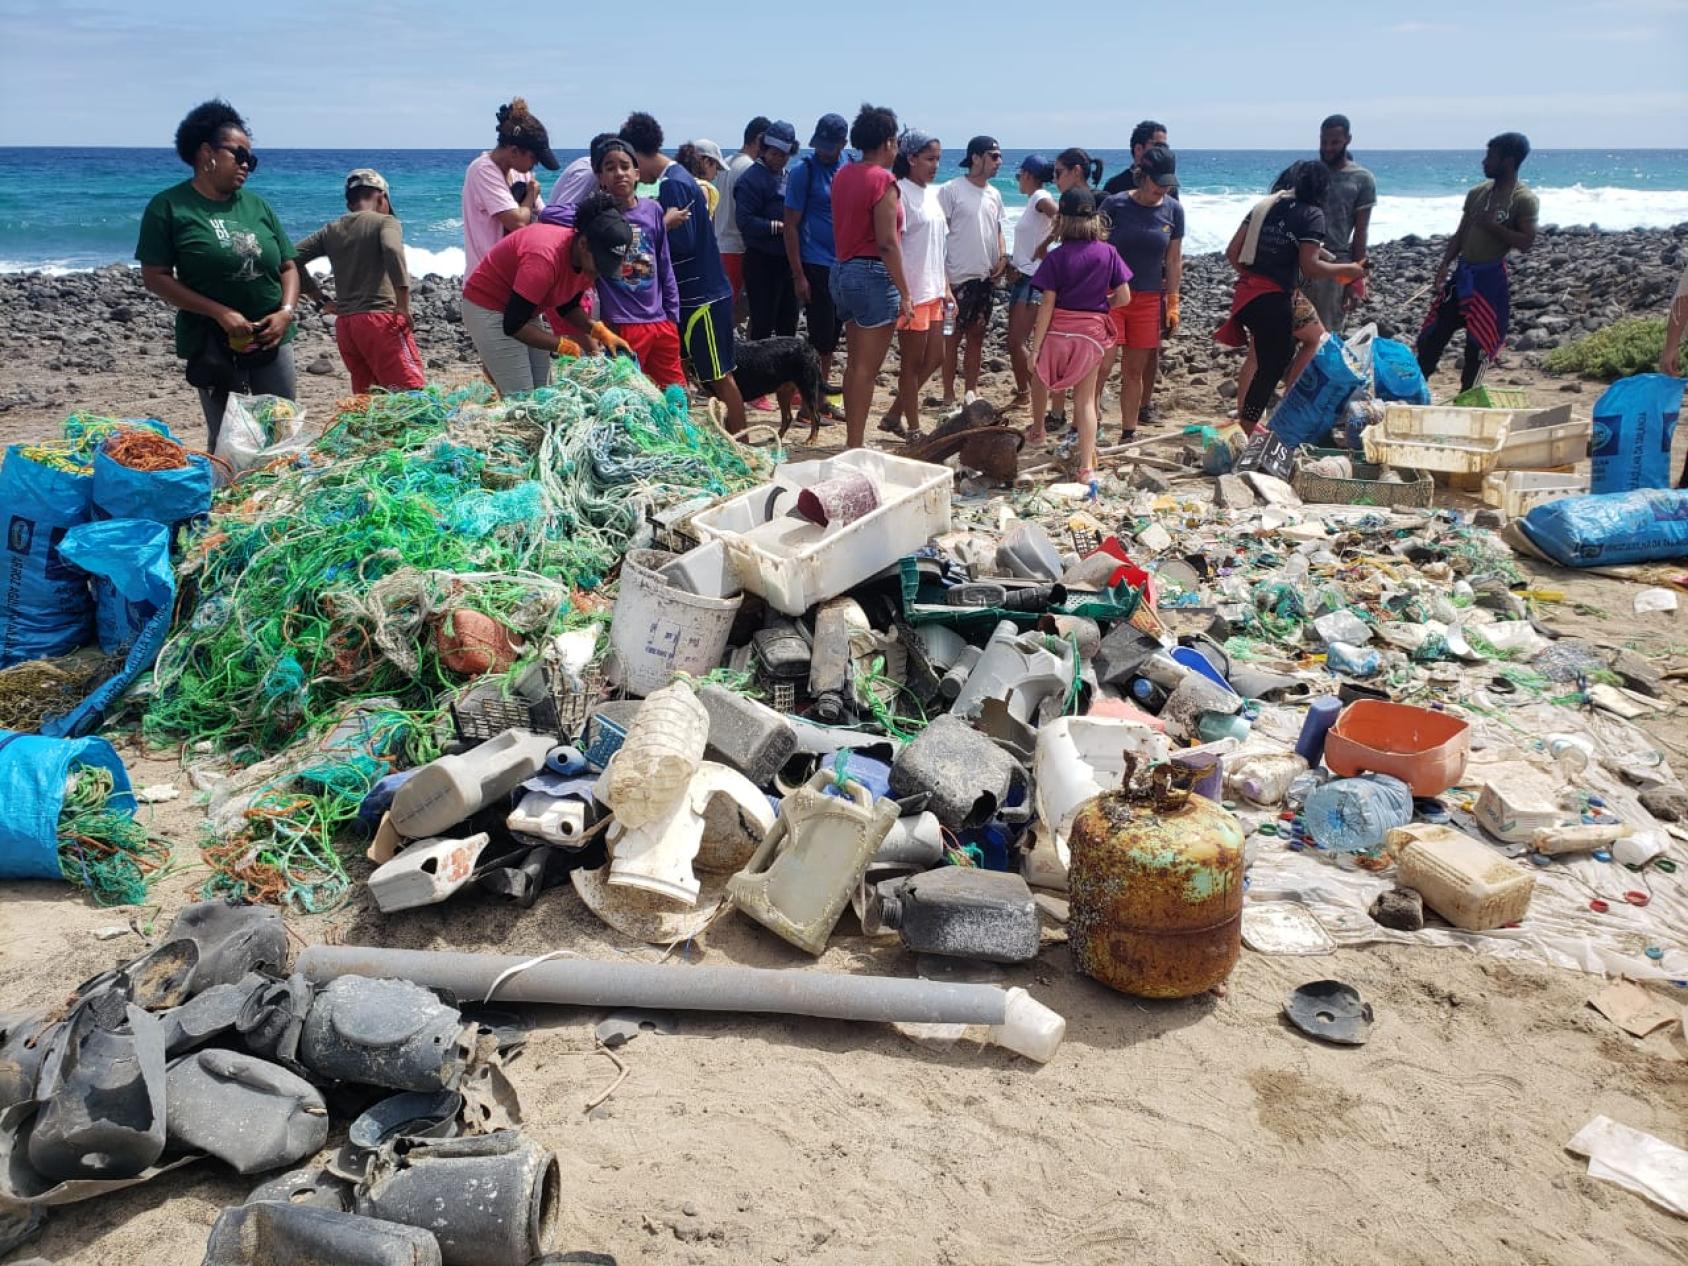 A group of people standing on a beach behind a large collection of assorted debris and trash. The waste includes items such as plastic bottles, nets, containers, a tire, and other miscellaneous items that have been washed up or left on the shore. This image highlights the environmental issue of ocean pollution and its impact on natural habitats.